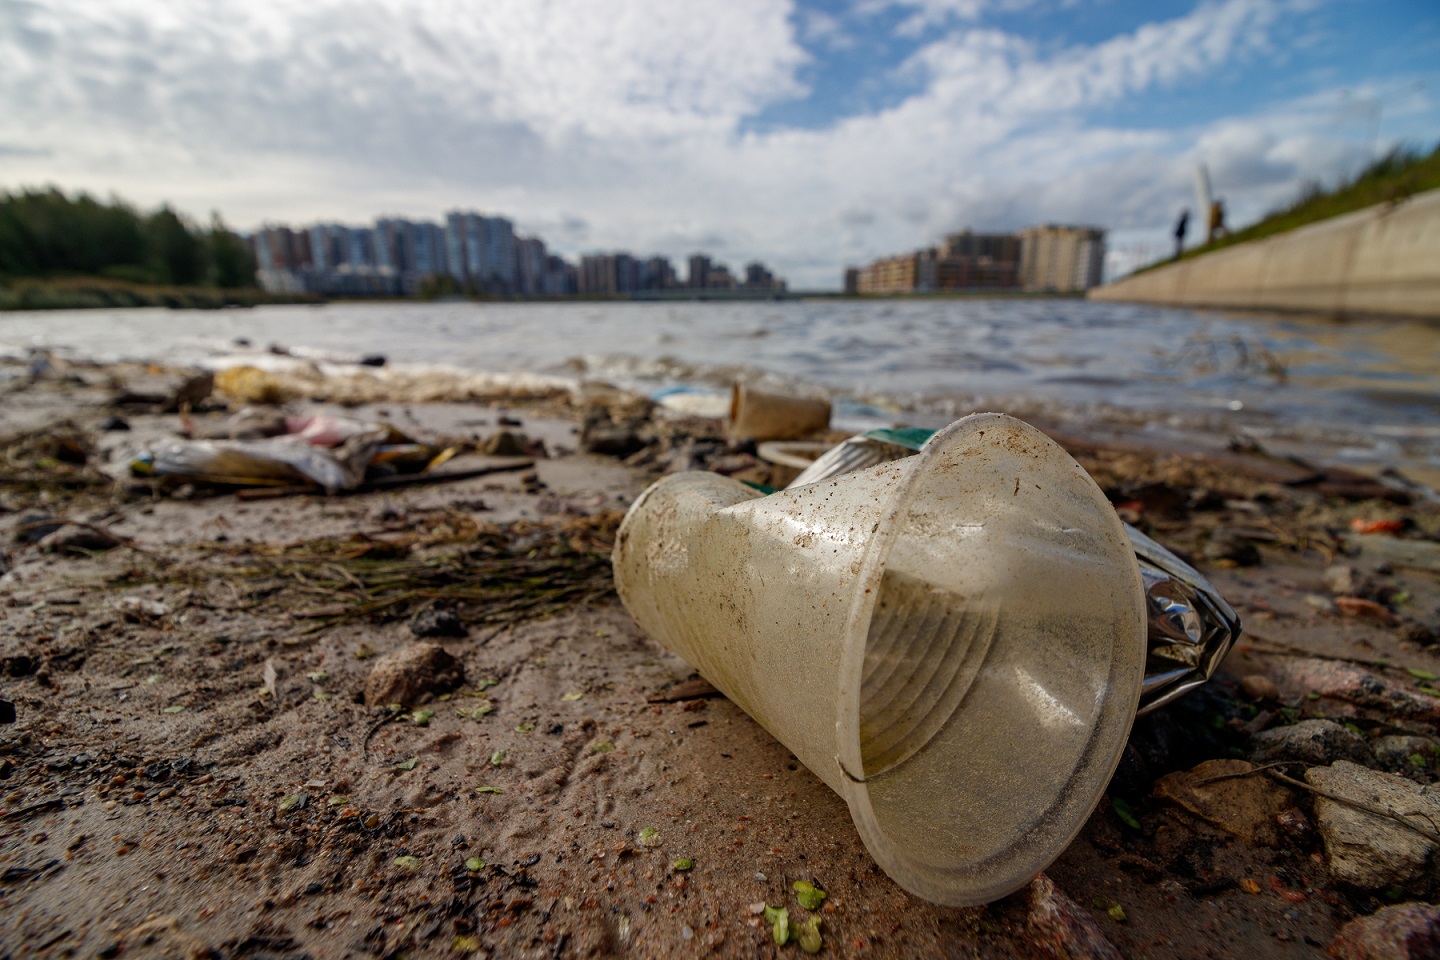 Plastic cup and other waste washed up on shoreline